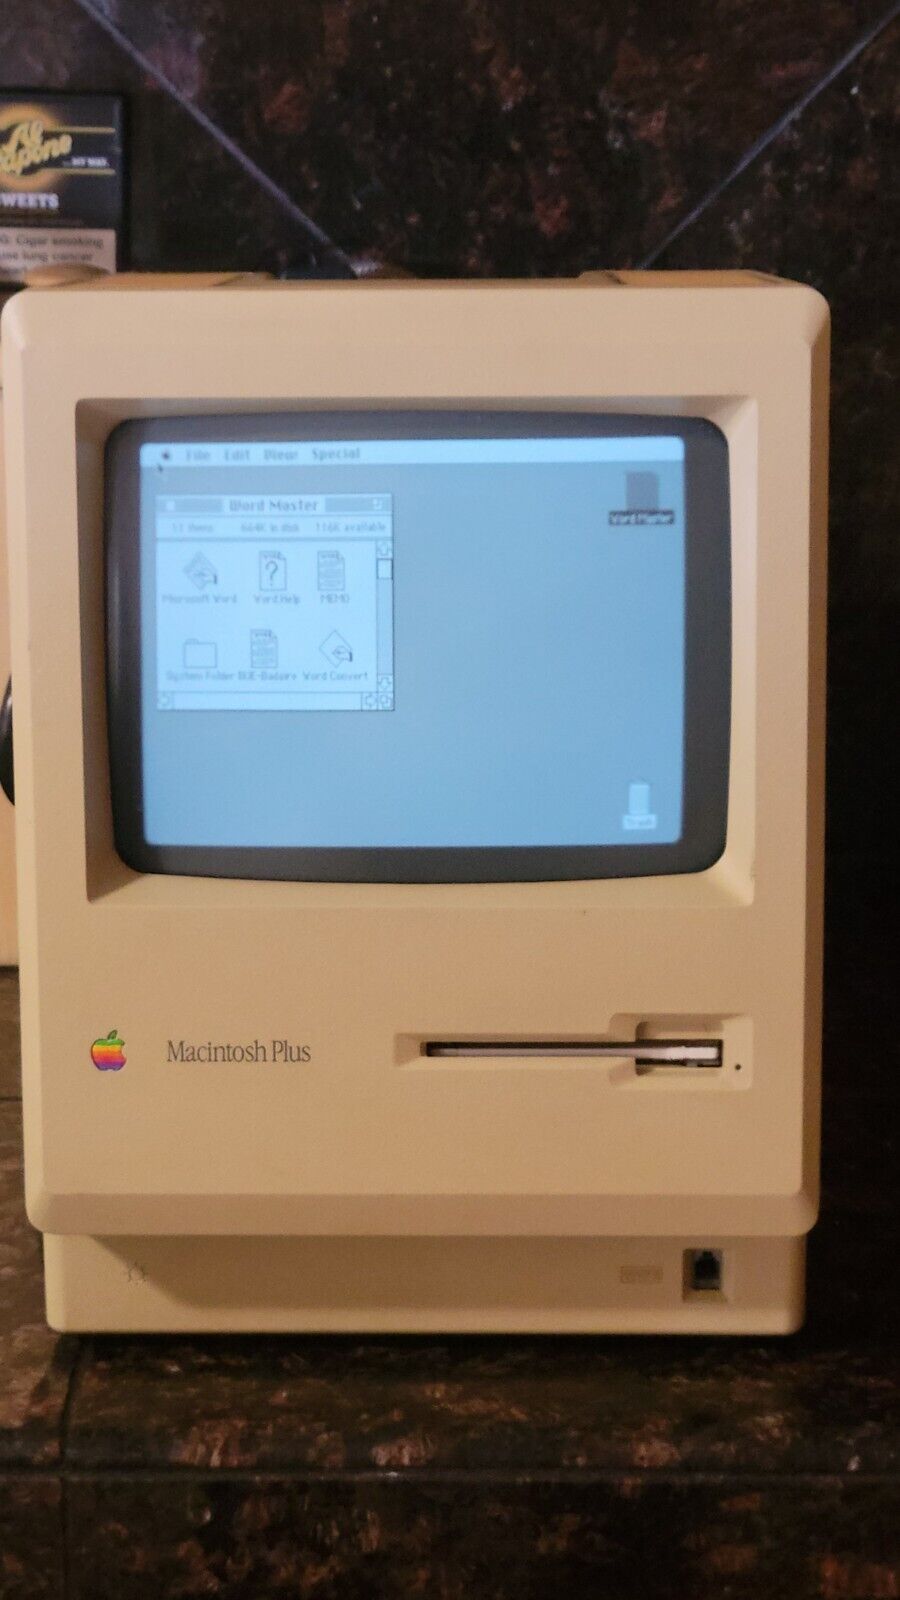 VTG Apple Macintosh Plus 1Mb Monitor Model M0001A - PARTS OR REPAIR ONLY READ